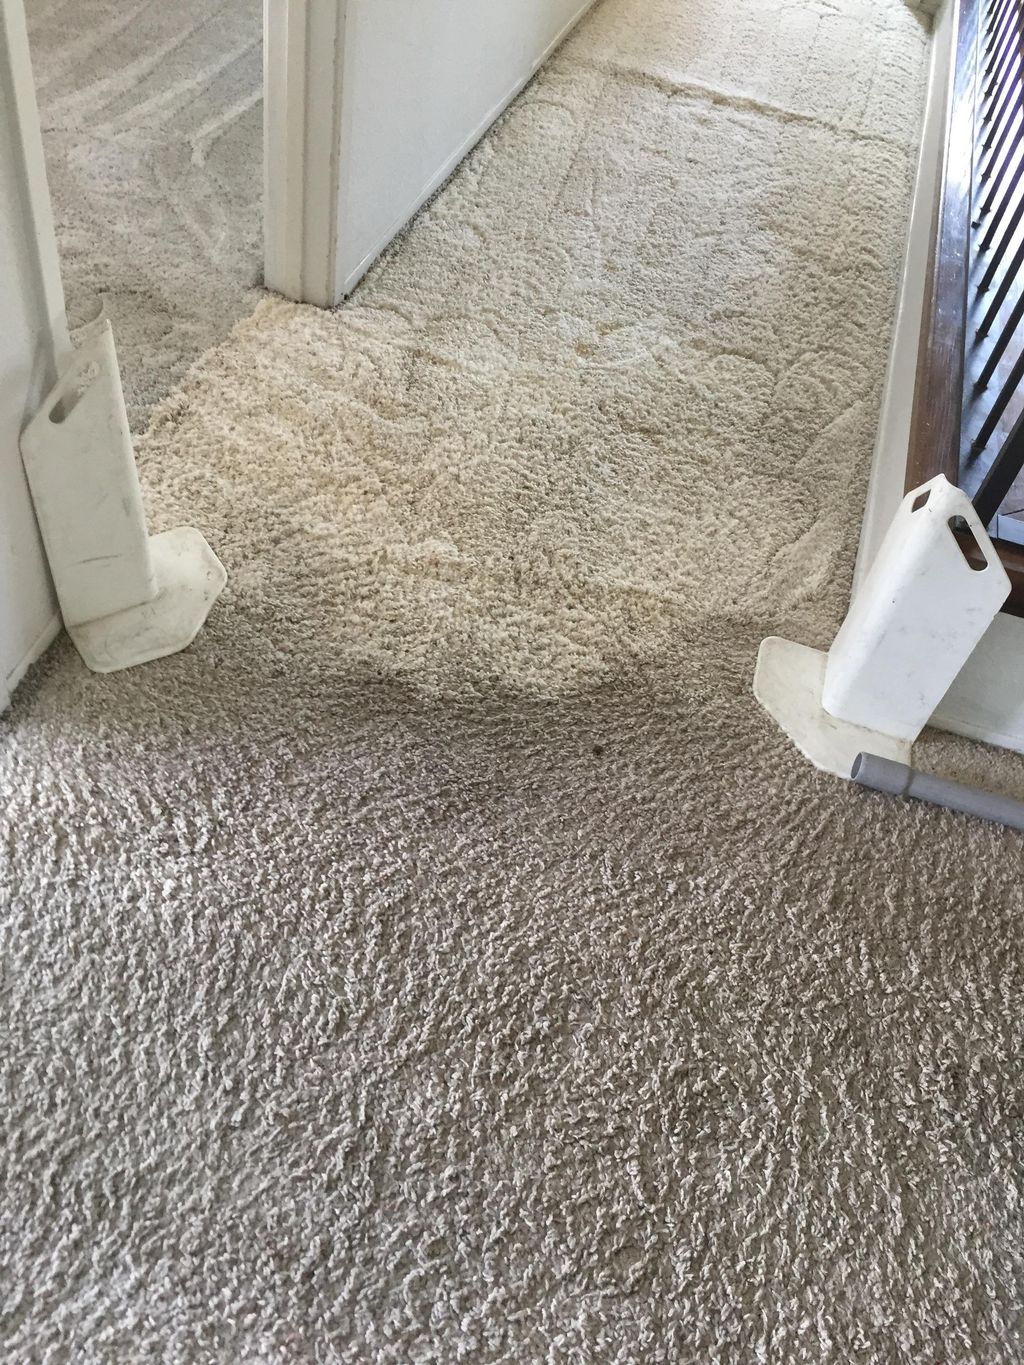 Good Guys Professional Carpet Cleaning